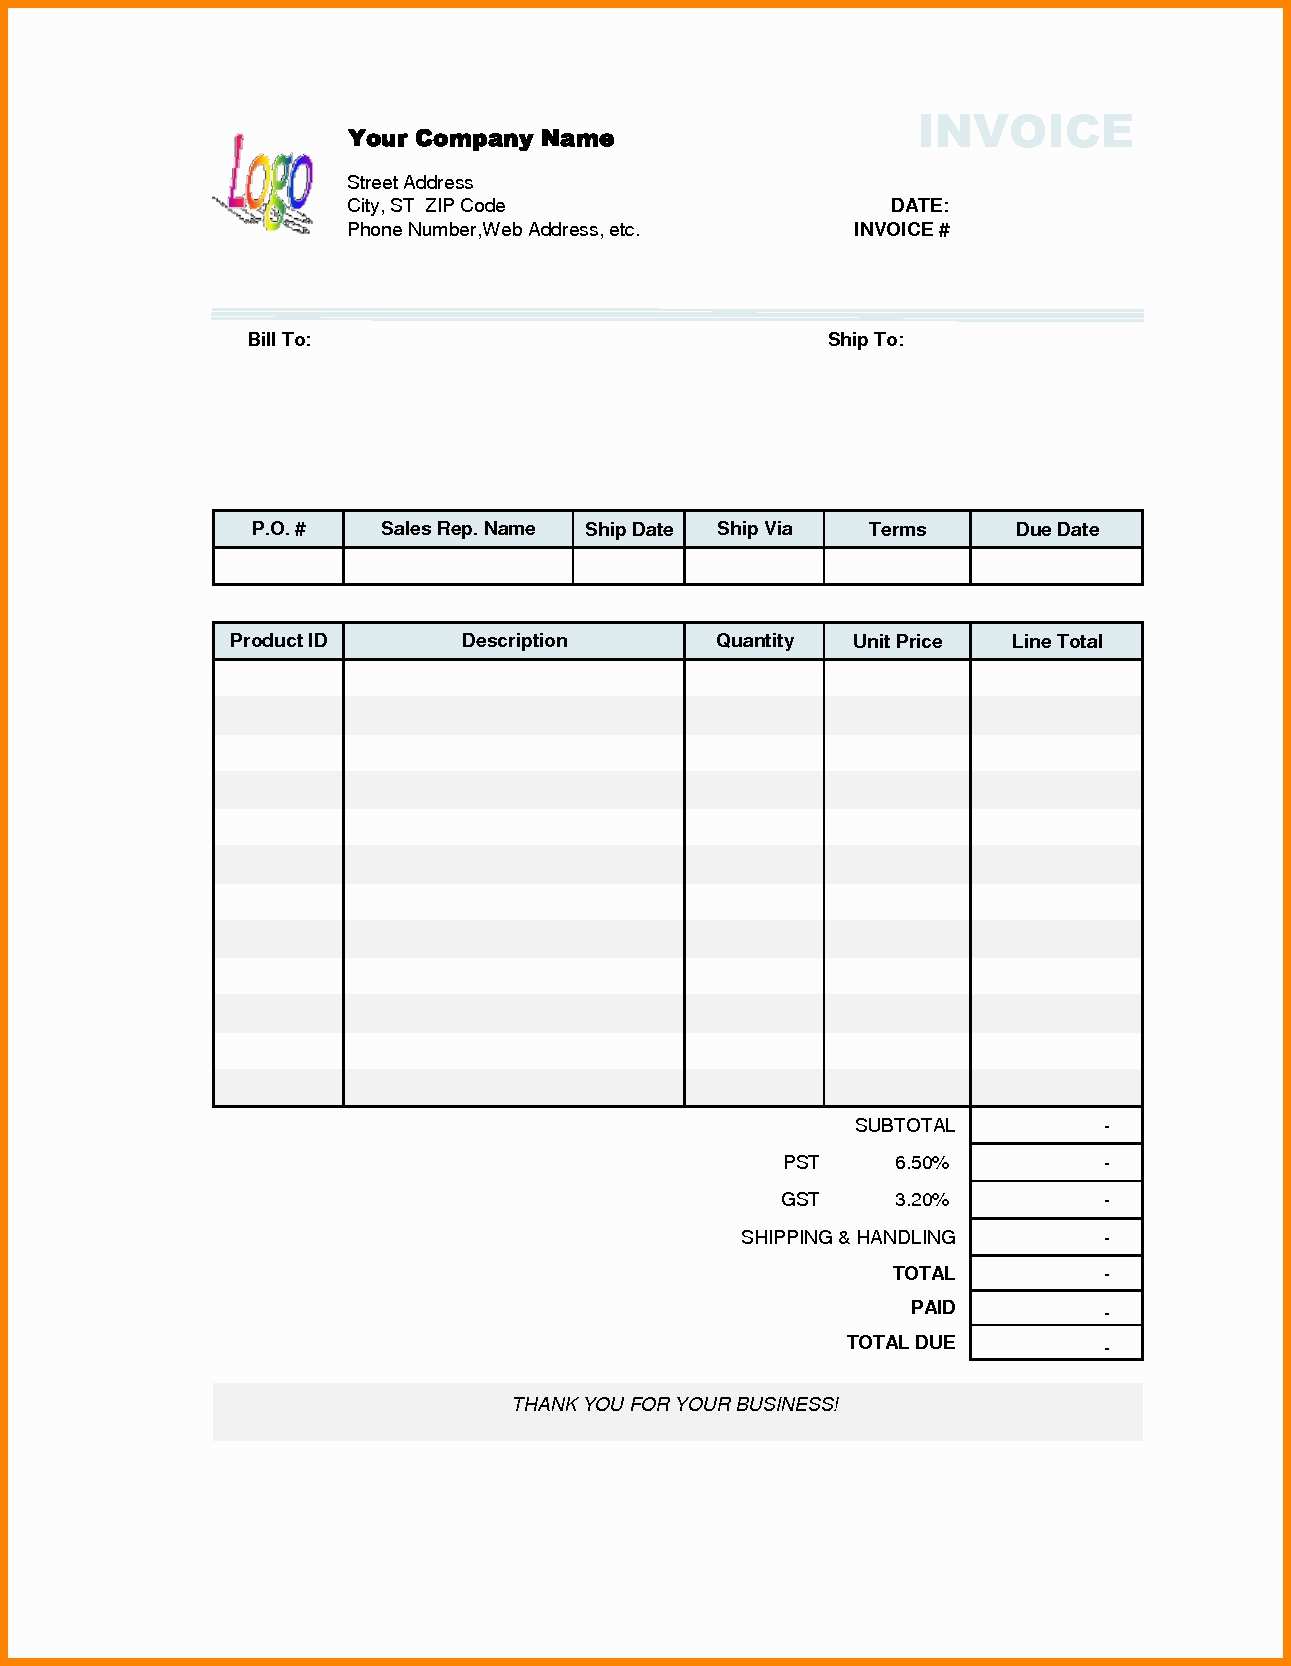 free-commercial-tax-invoice-template-in-adobe-illustrator-templatenet